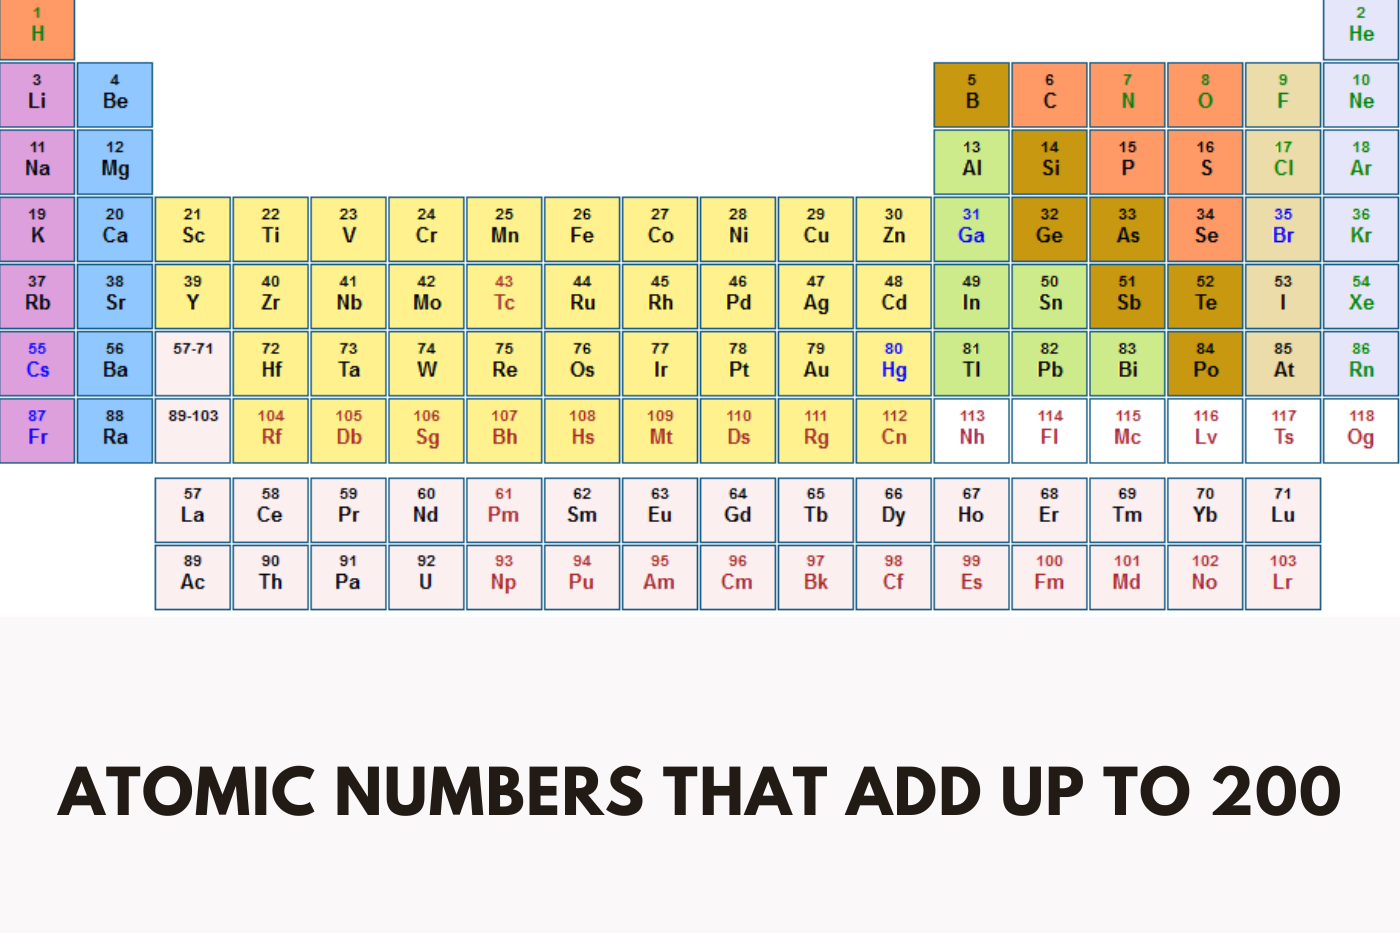 It may appear arbitrary, but the idea that atomic numbers that Add up to 200 has profound implications for chemistry. The uniqueness of a relationship is revealed when the combined atomic number of two or three elements reaches 200.